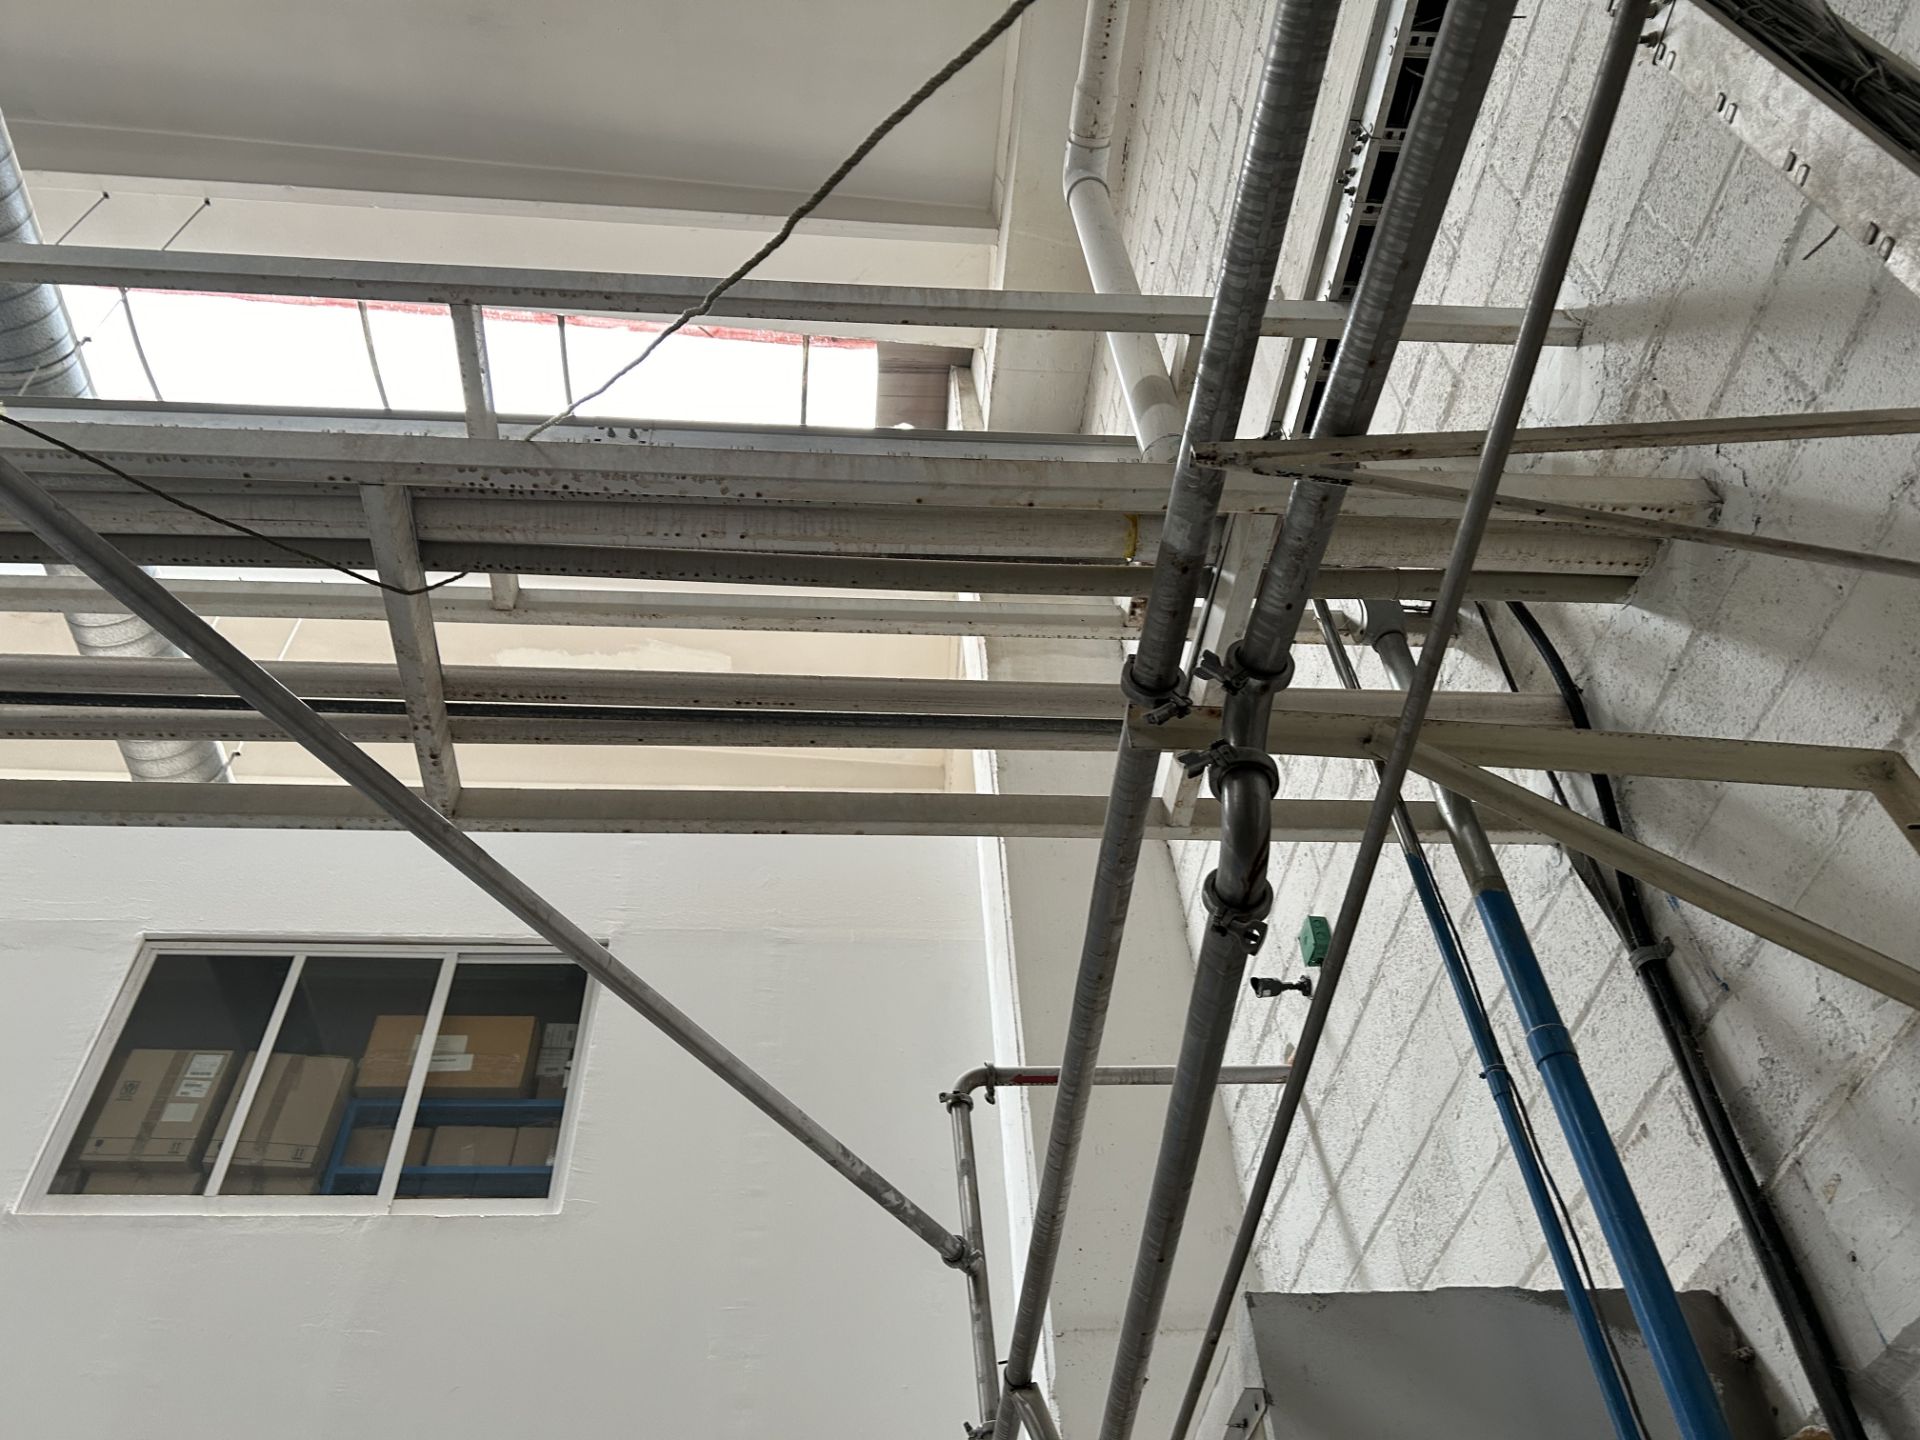 1 IPR Beam Mezzanine Structure measuring approximately 8 x 5.50 x 4.10m, contains: 8 IPR horizontal - Image 25 of 35